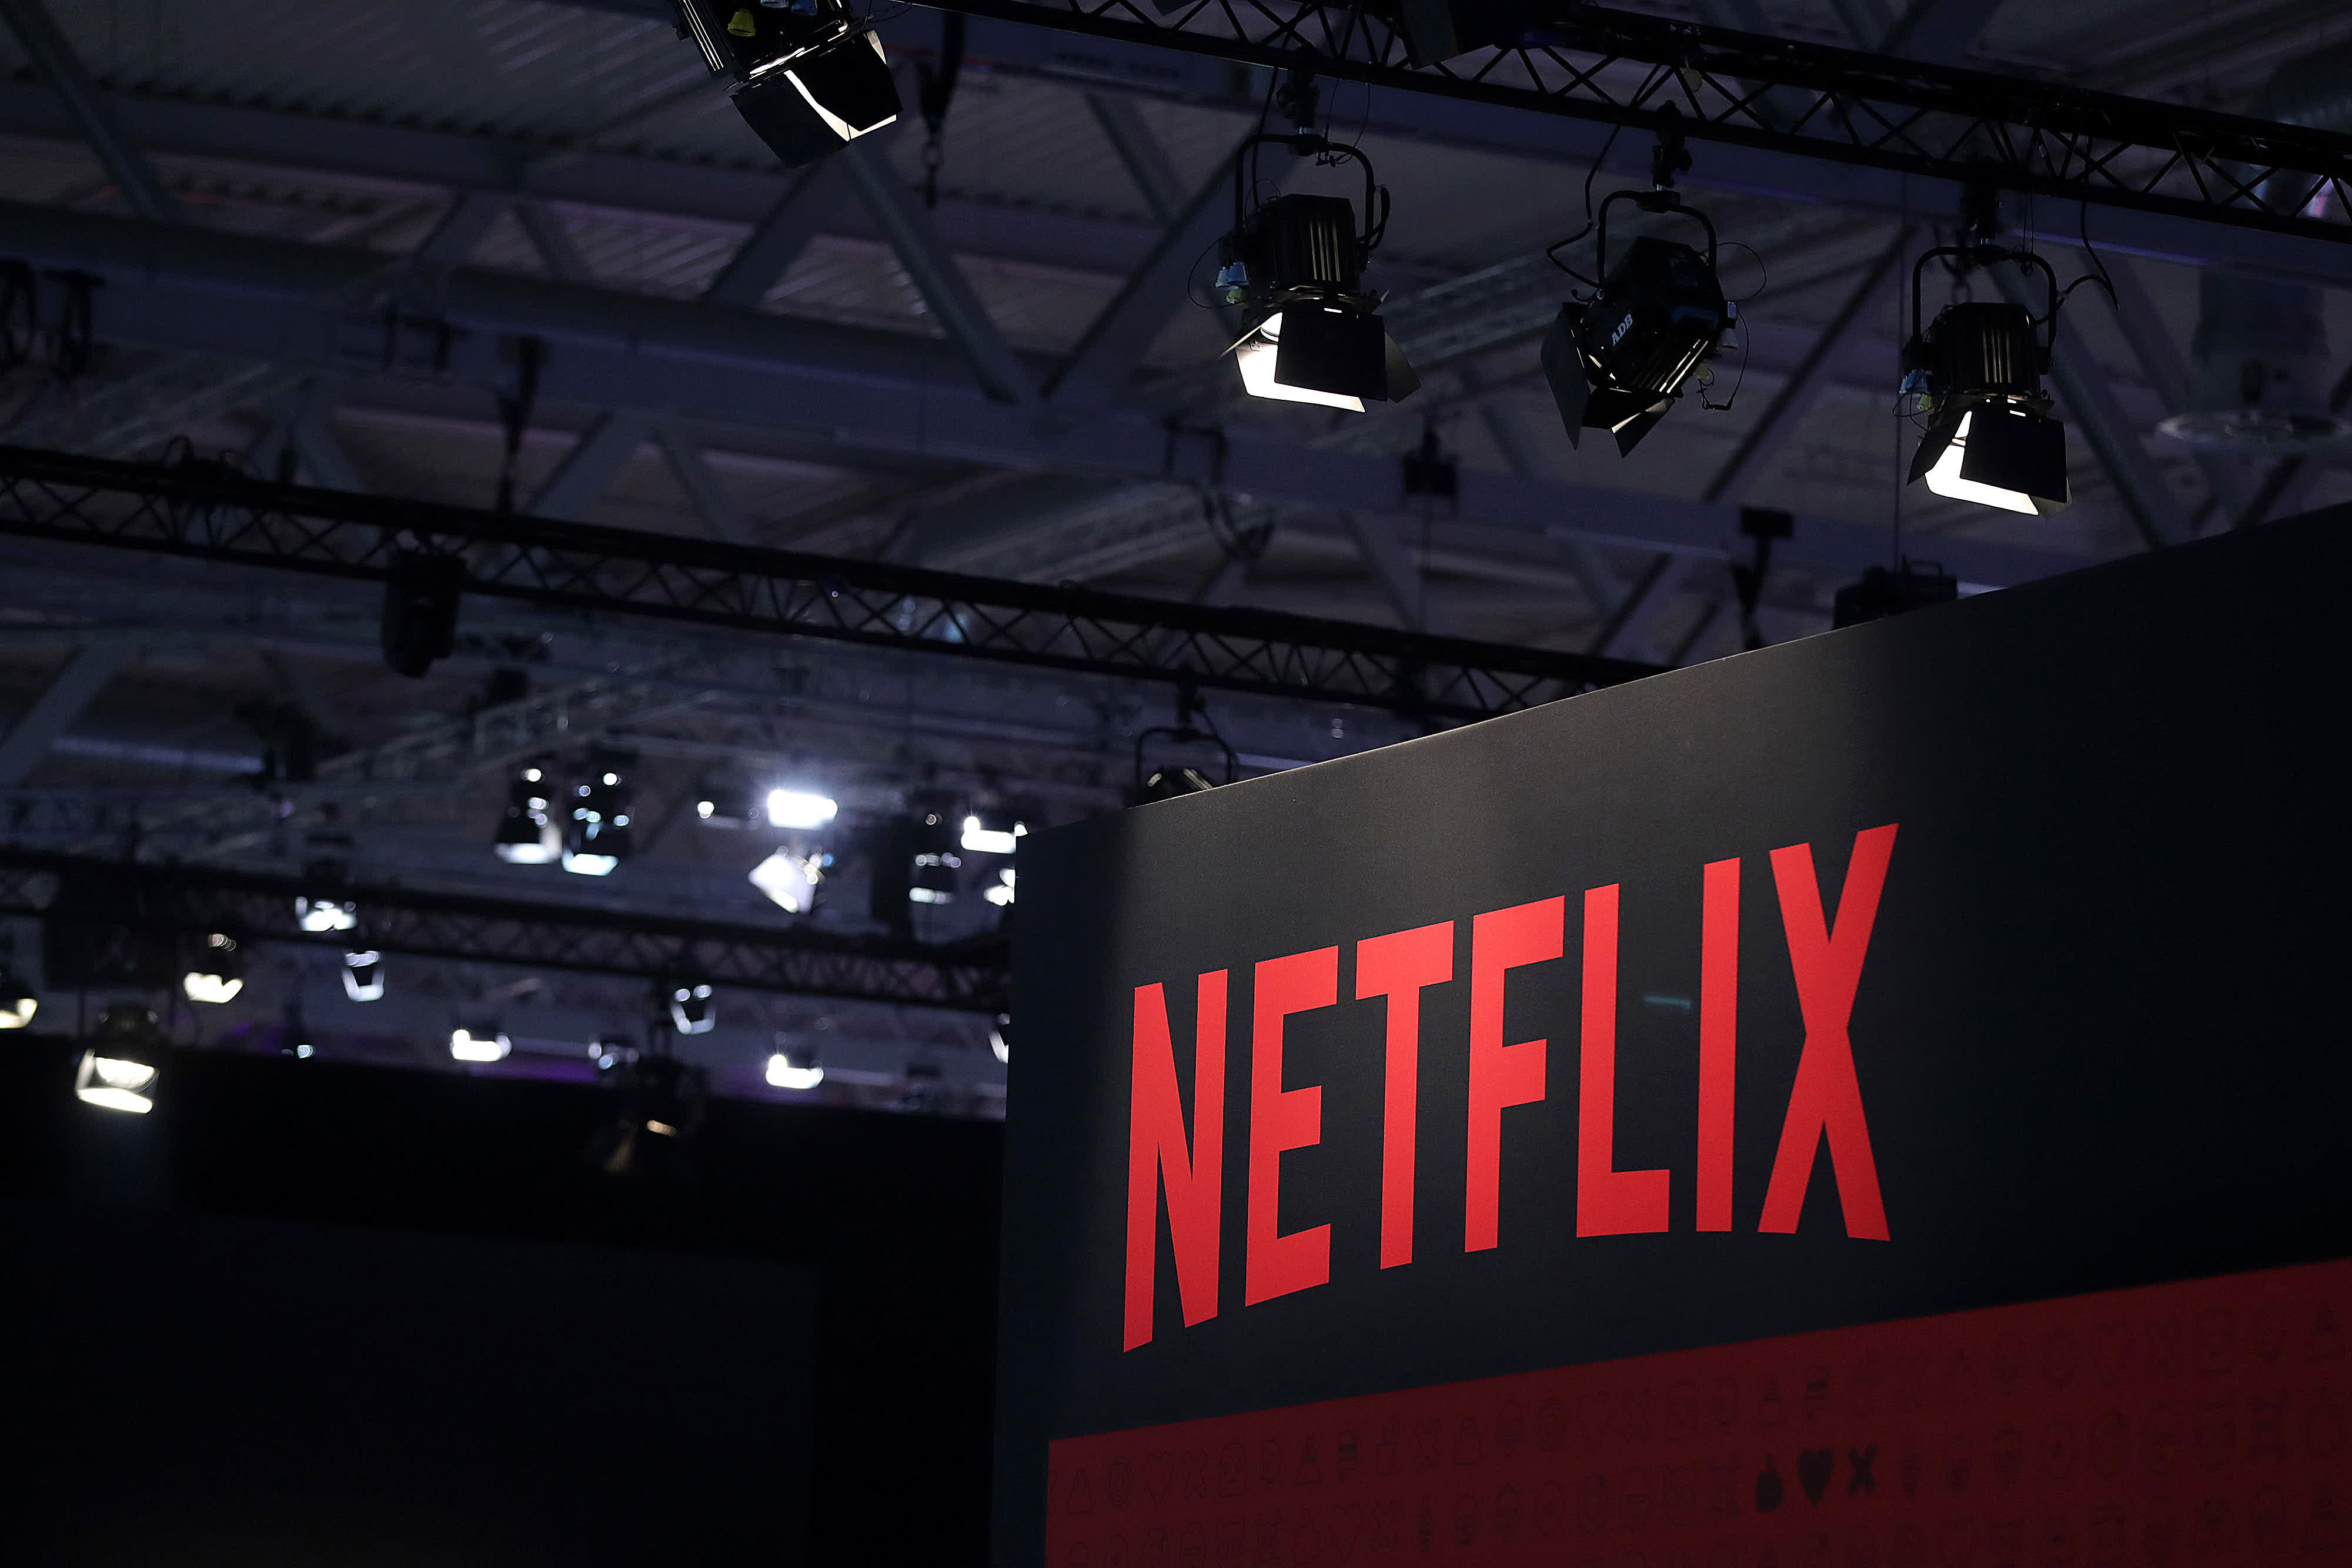 Netflix is testing new anti-account sharing measures on some users